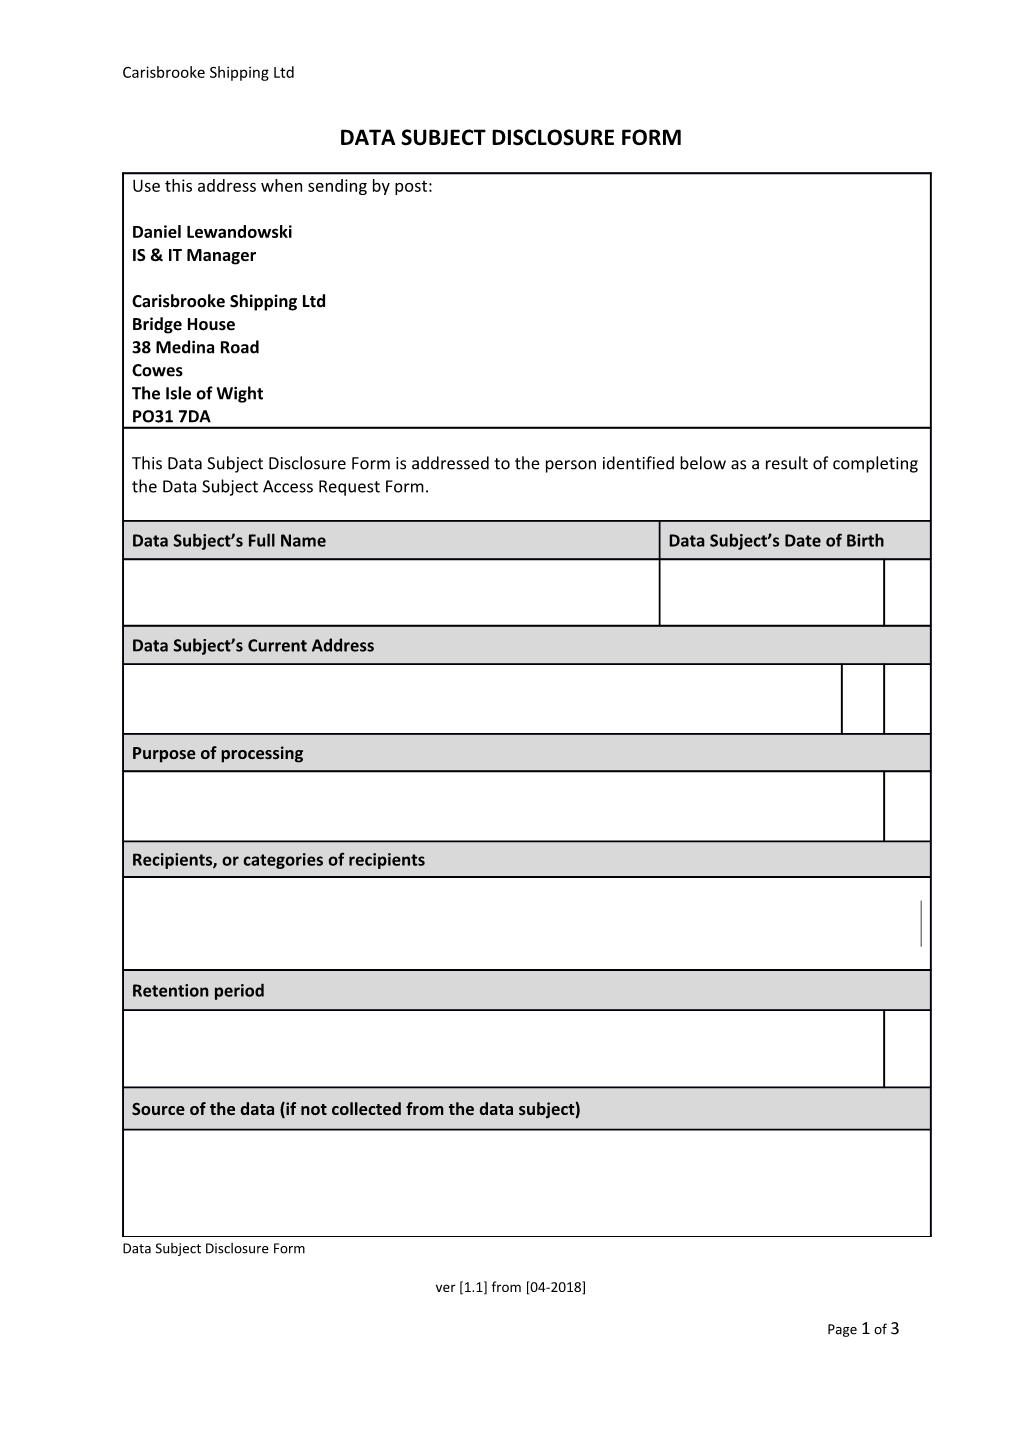 Data Subject Disclosure Form